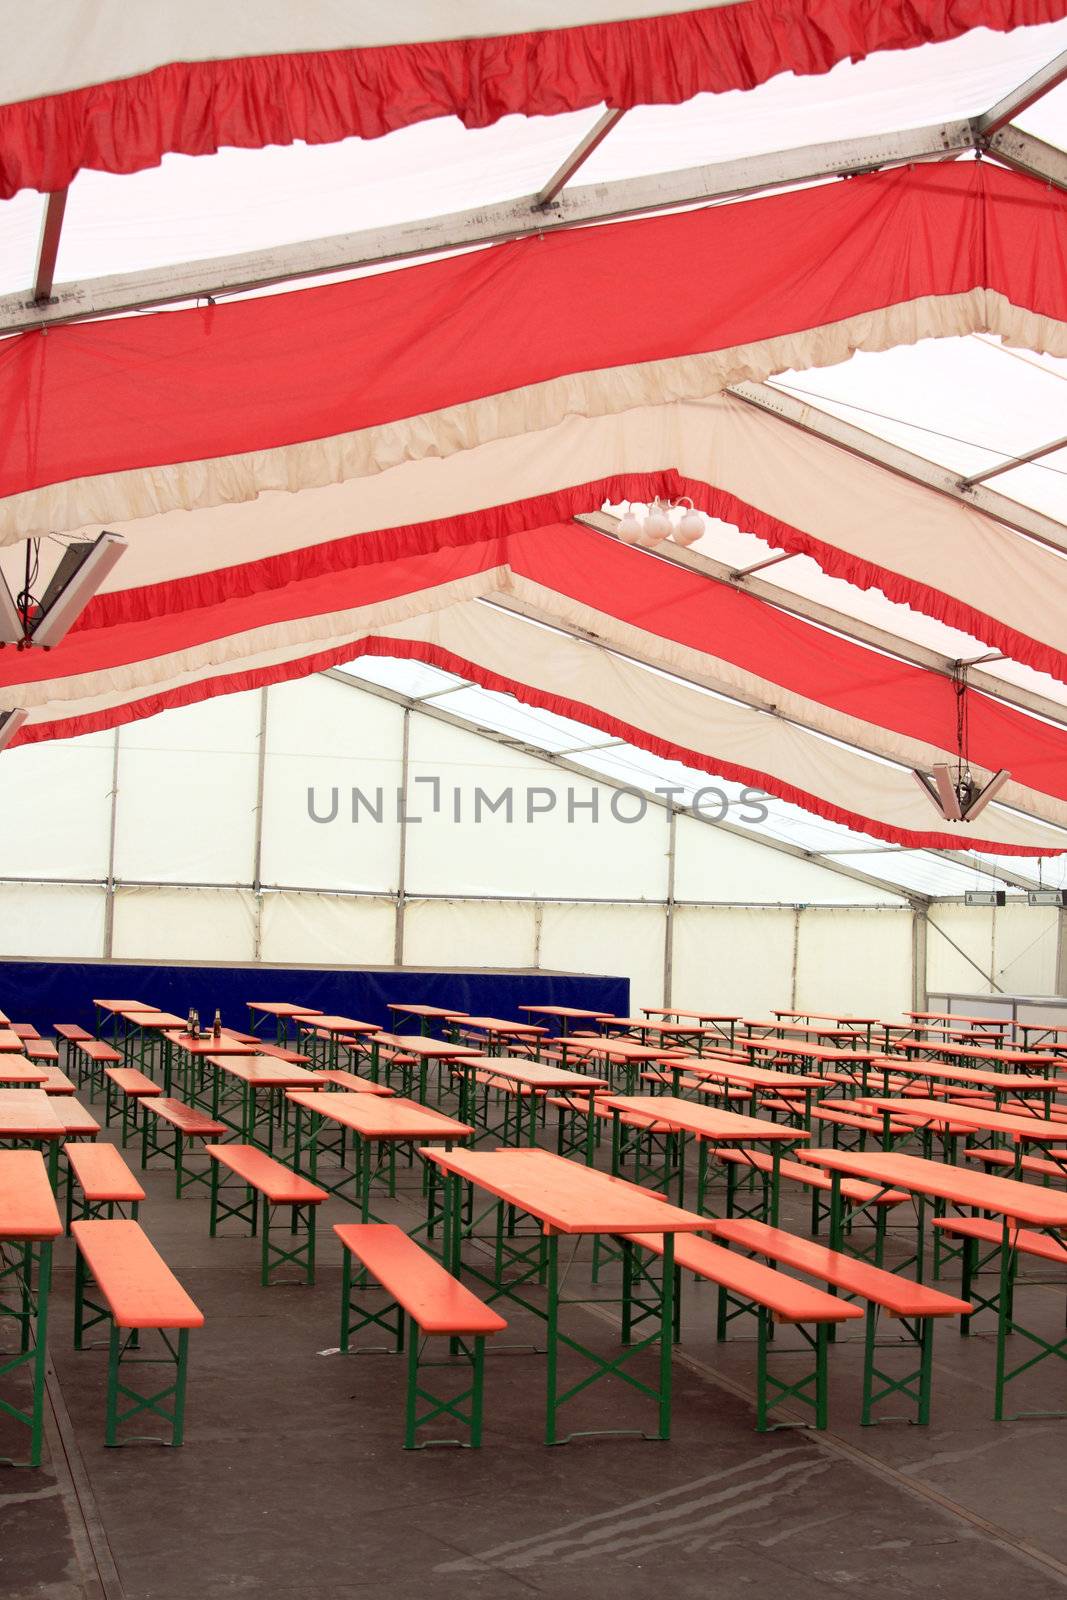 typical folding bench and table sets inside the beer hall at a german fair